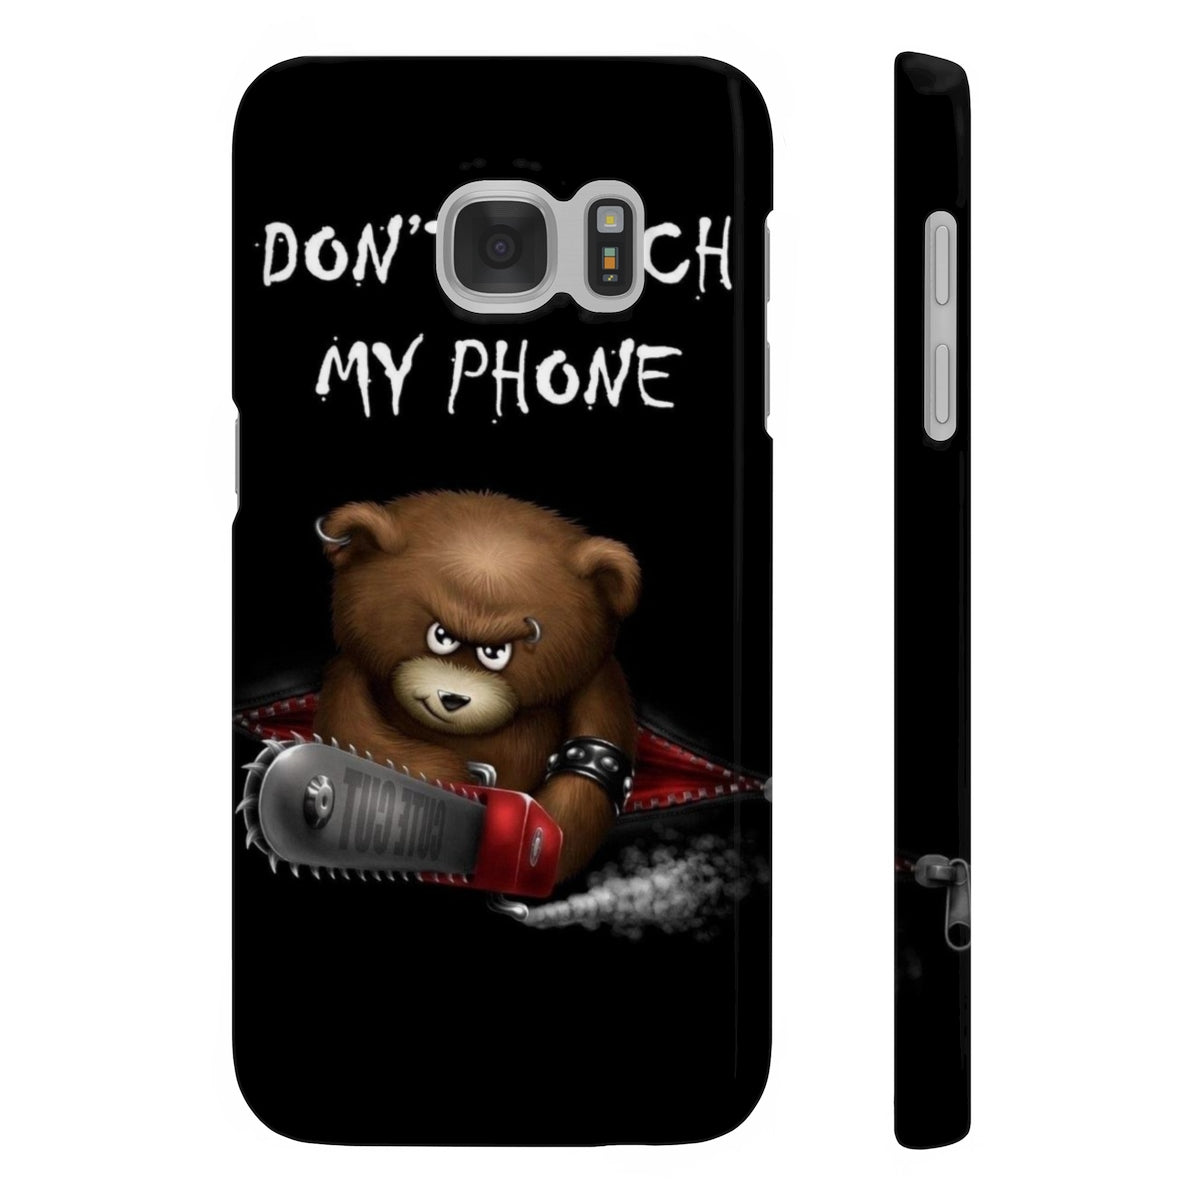 Don't touch my phone scary bear Wpaps Slim Phone Cases